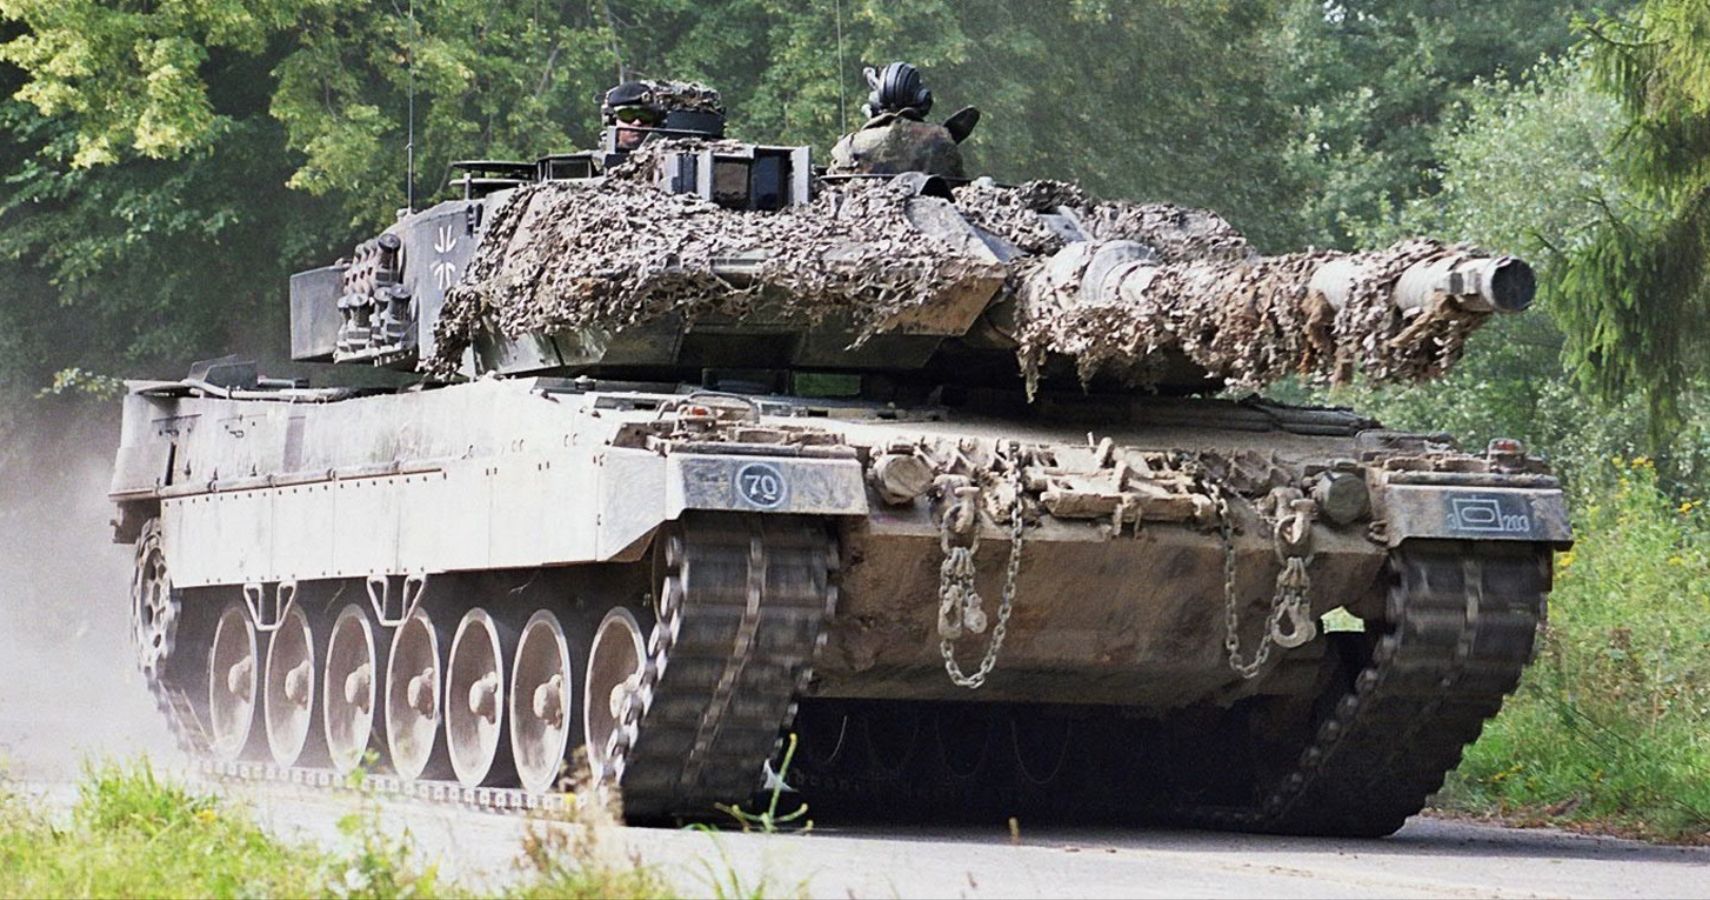 Why The American Heavyweight M1 Abrams Can’t Keep Up With The German Leopard 2